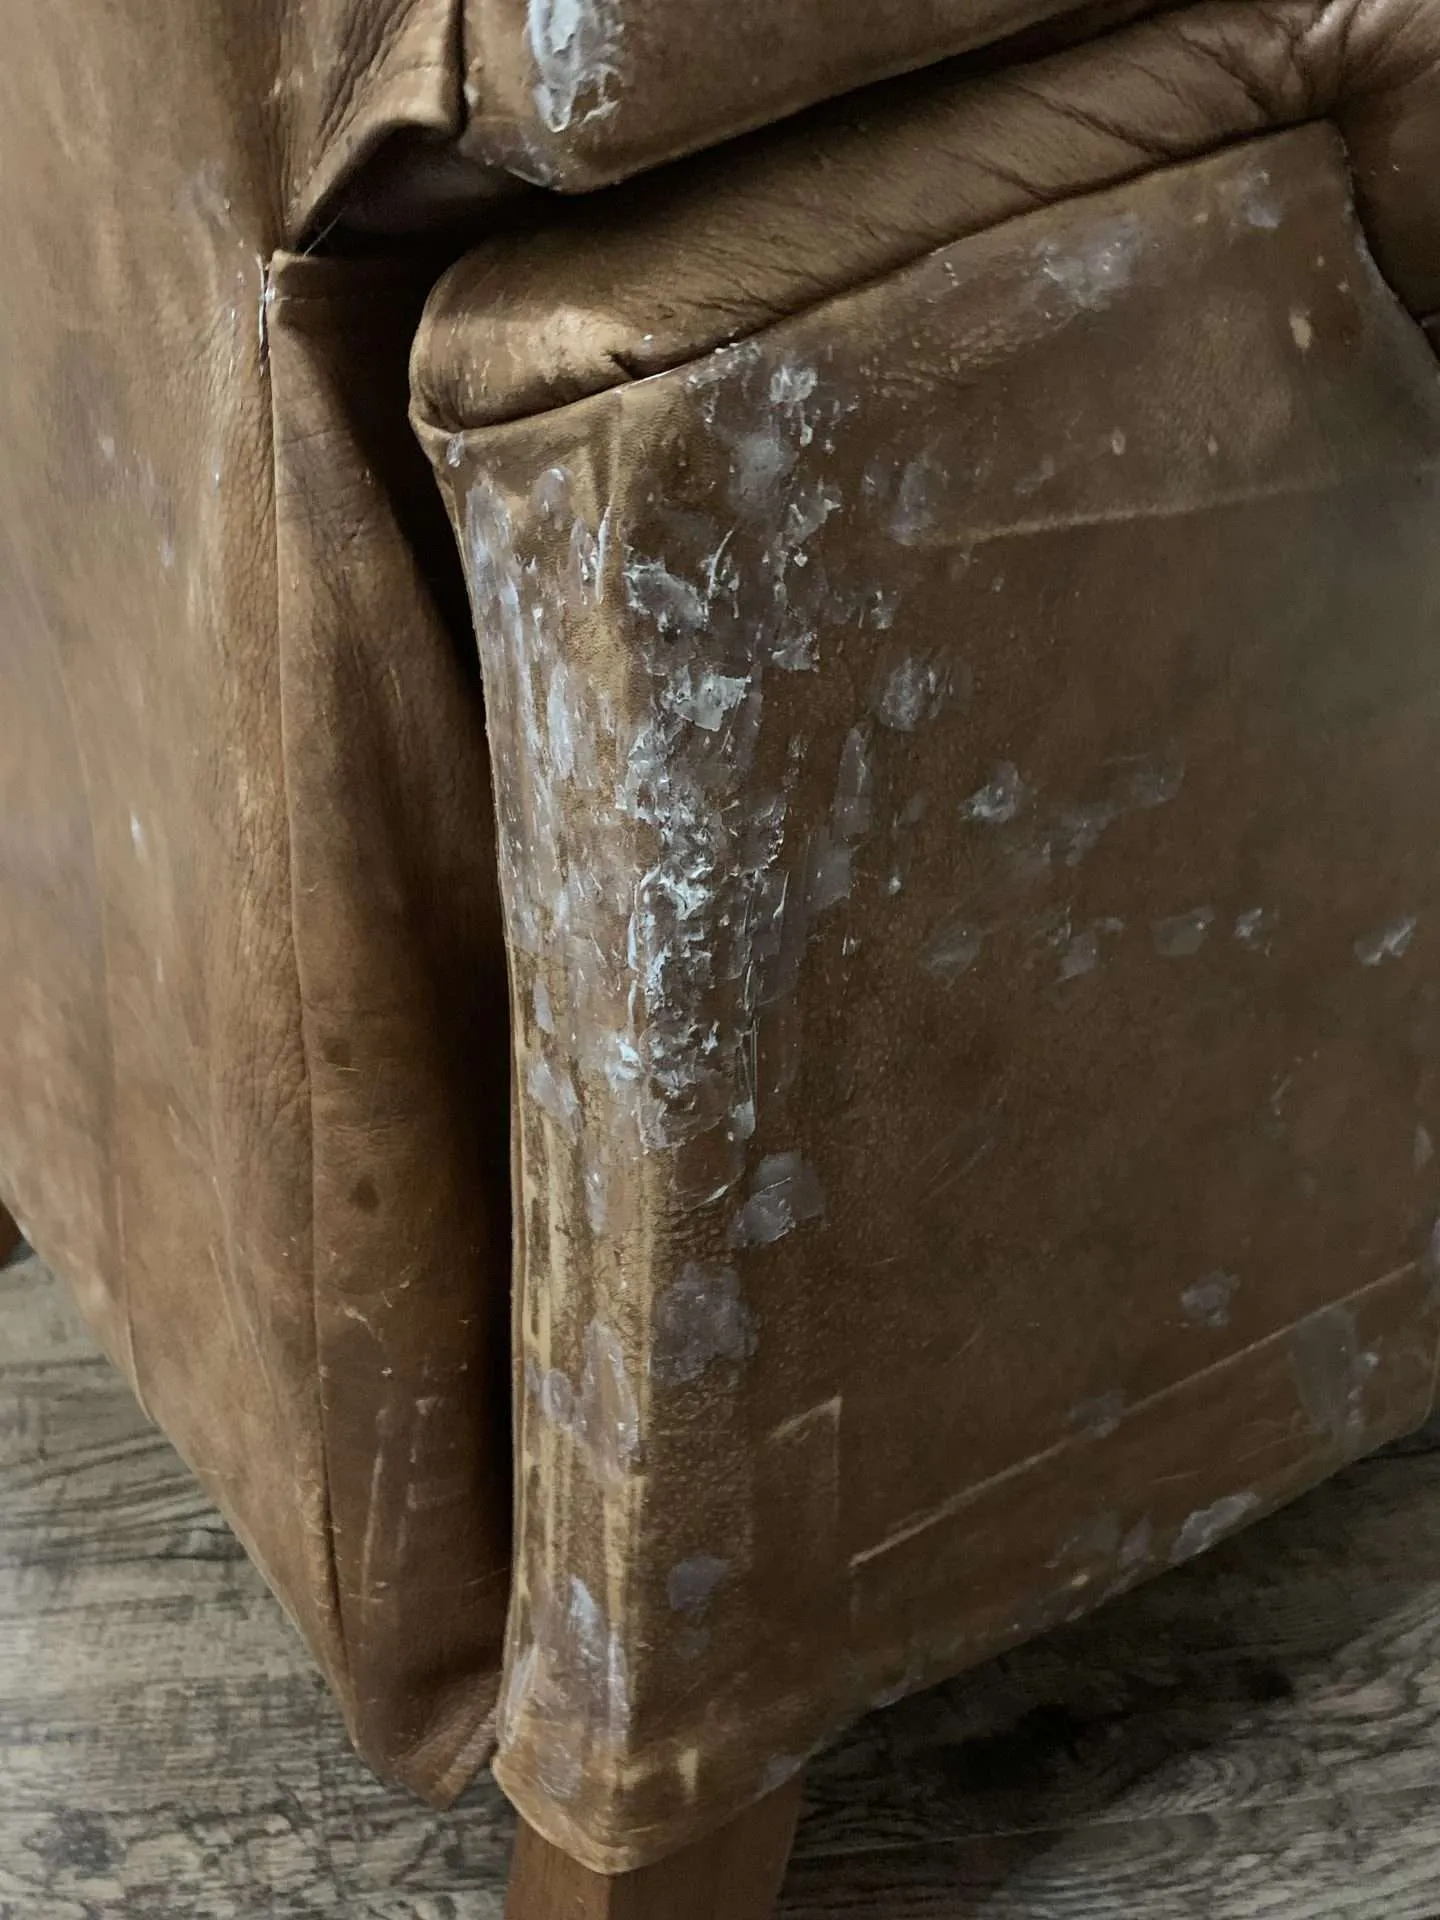 How to repair and dye leather furniture.